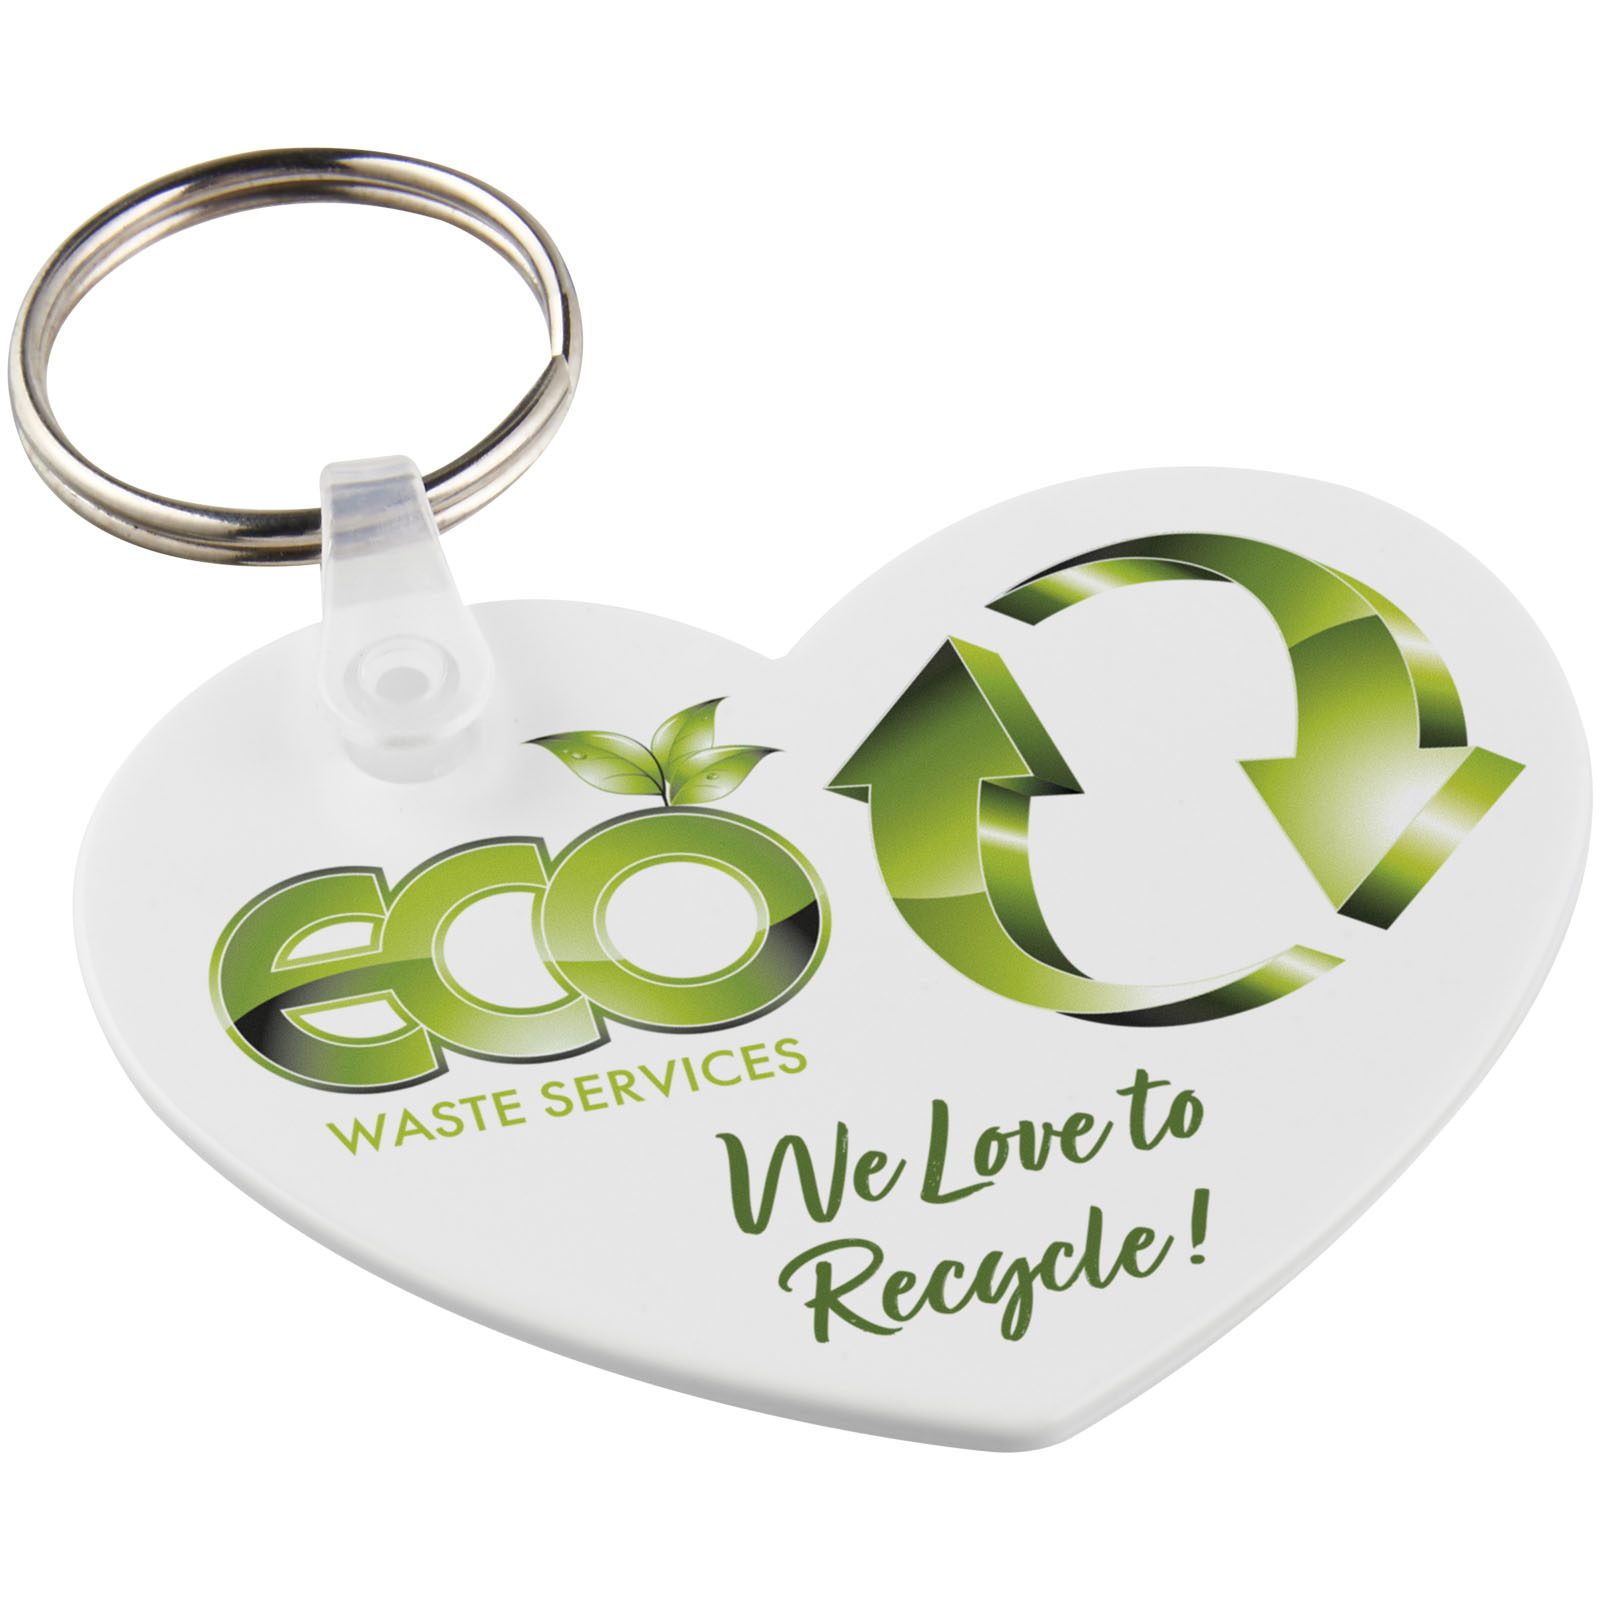 Advertising Keychains & Keyrings - Tait heart-shaped recycled keychain